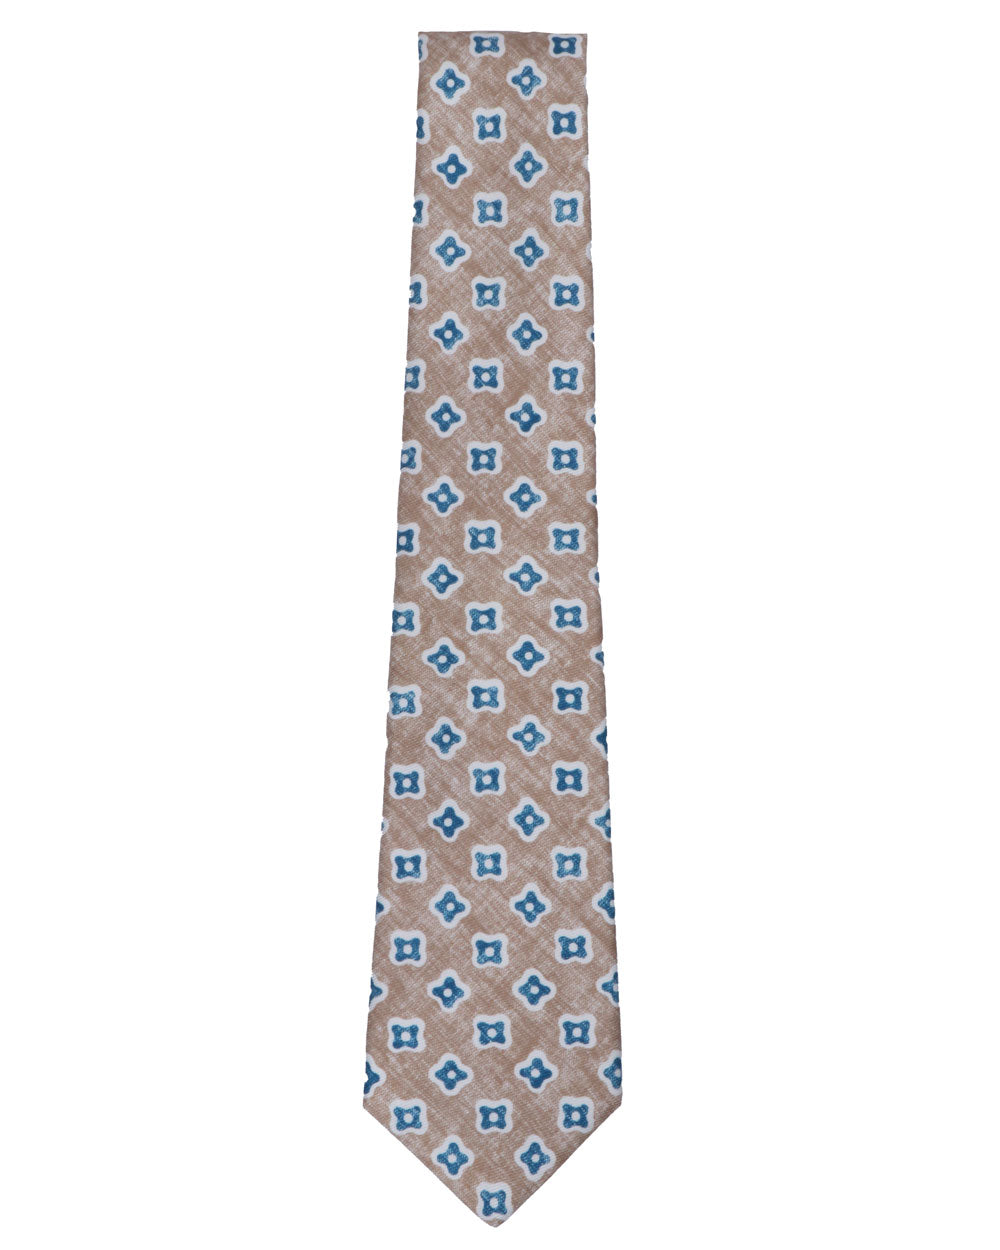 Blue and Tan Floral Tie